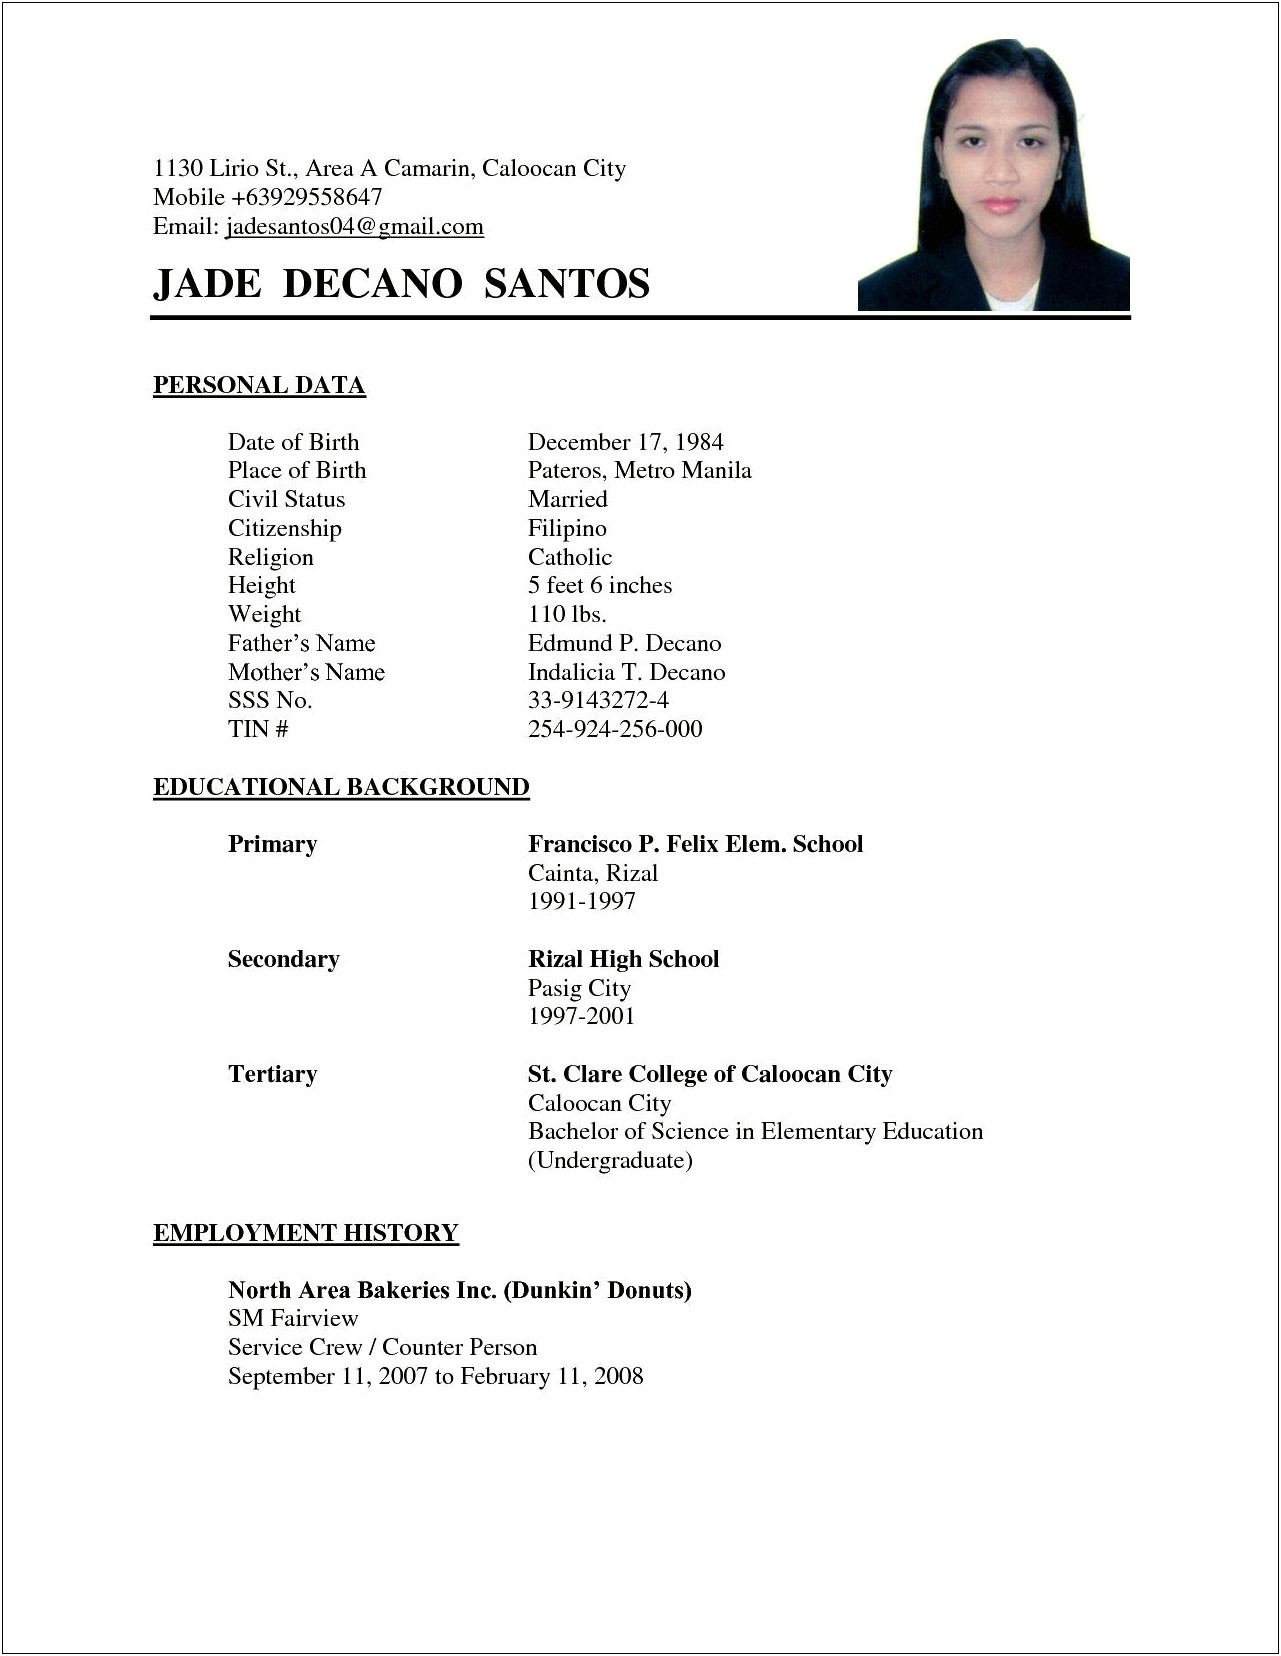 Sample Resume For Married Applicants